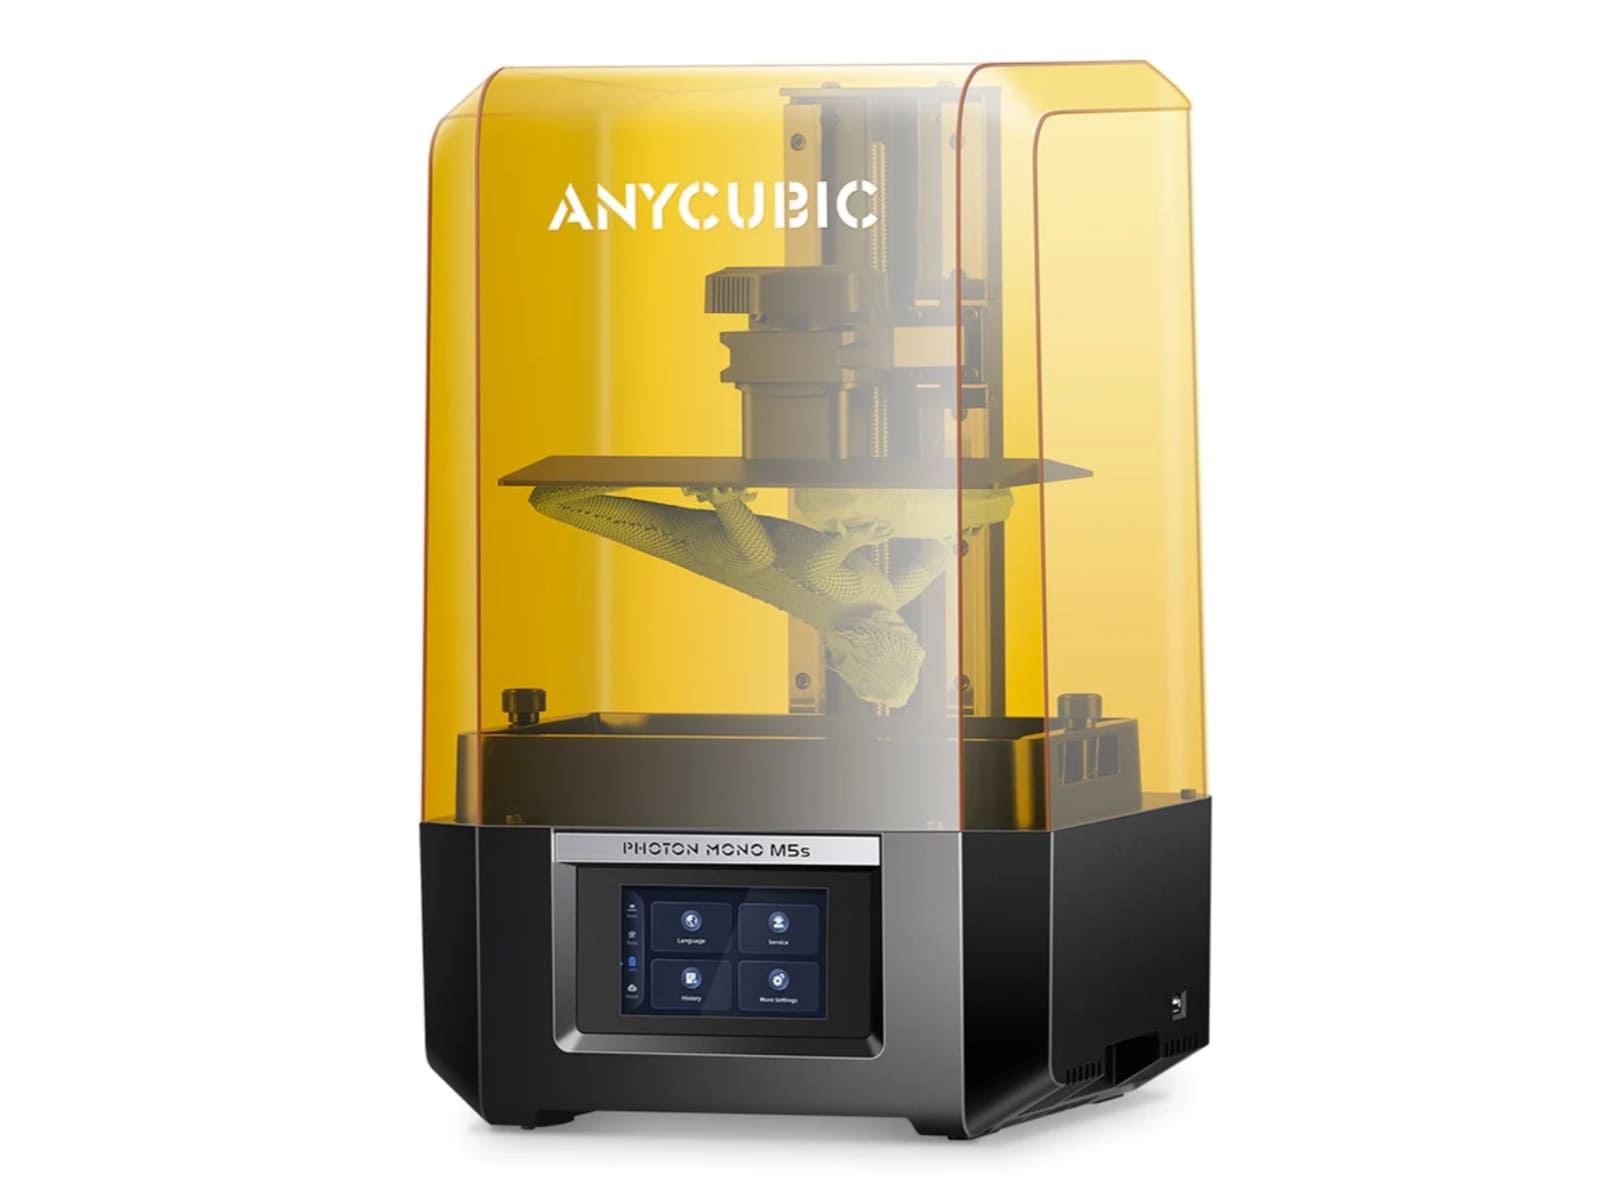 Anycubic Photon Mono M5s-Credit from Anycubic